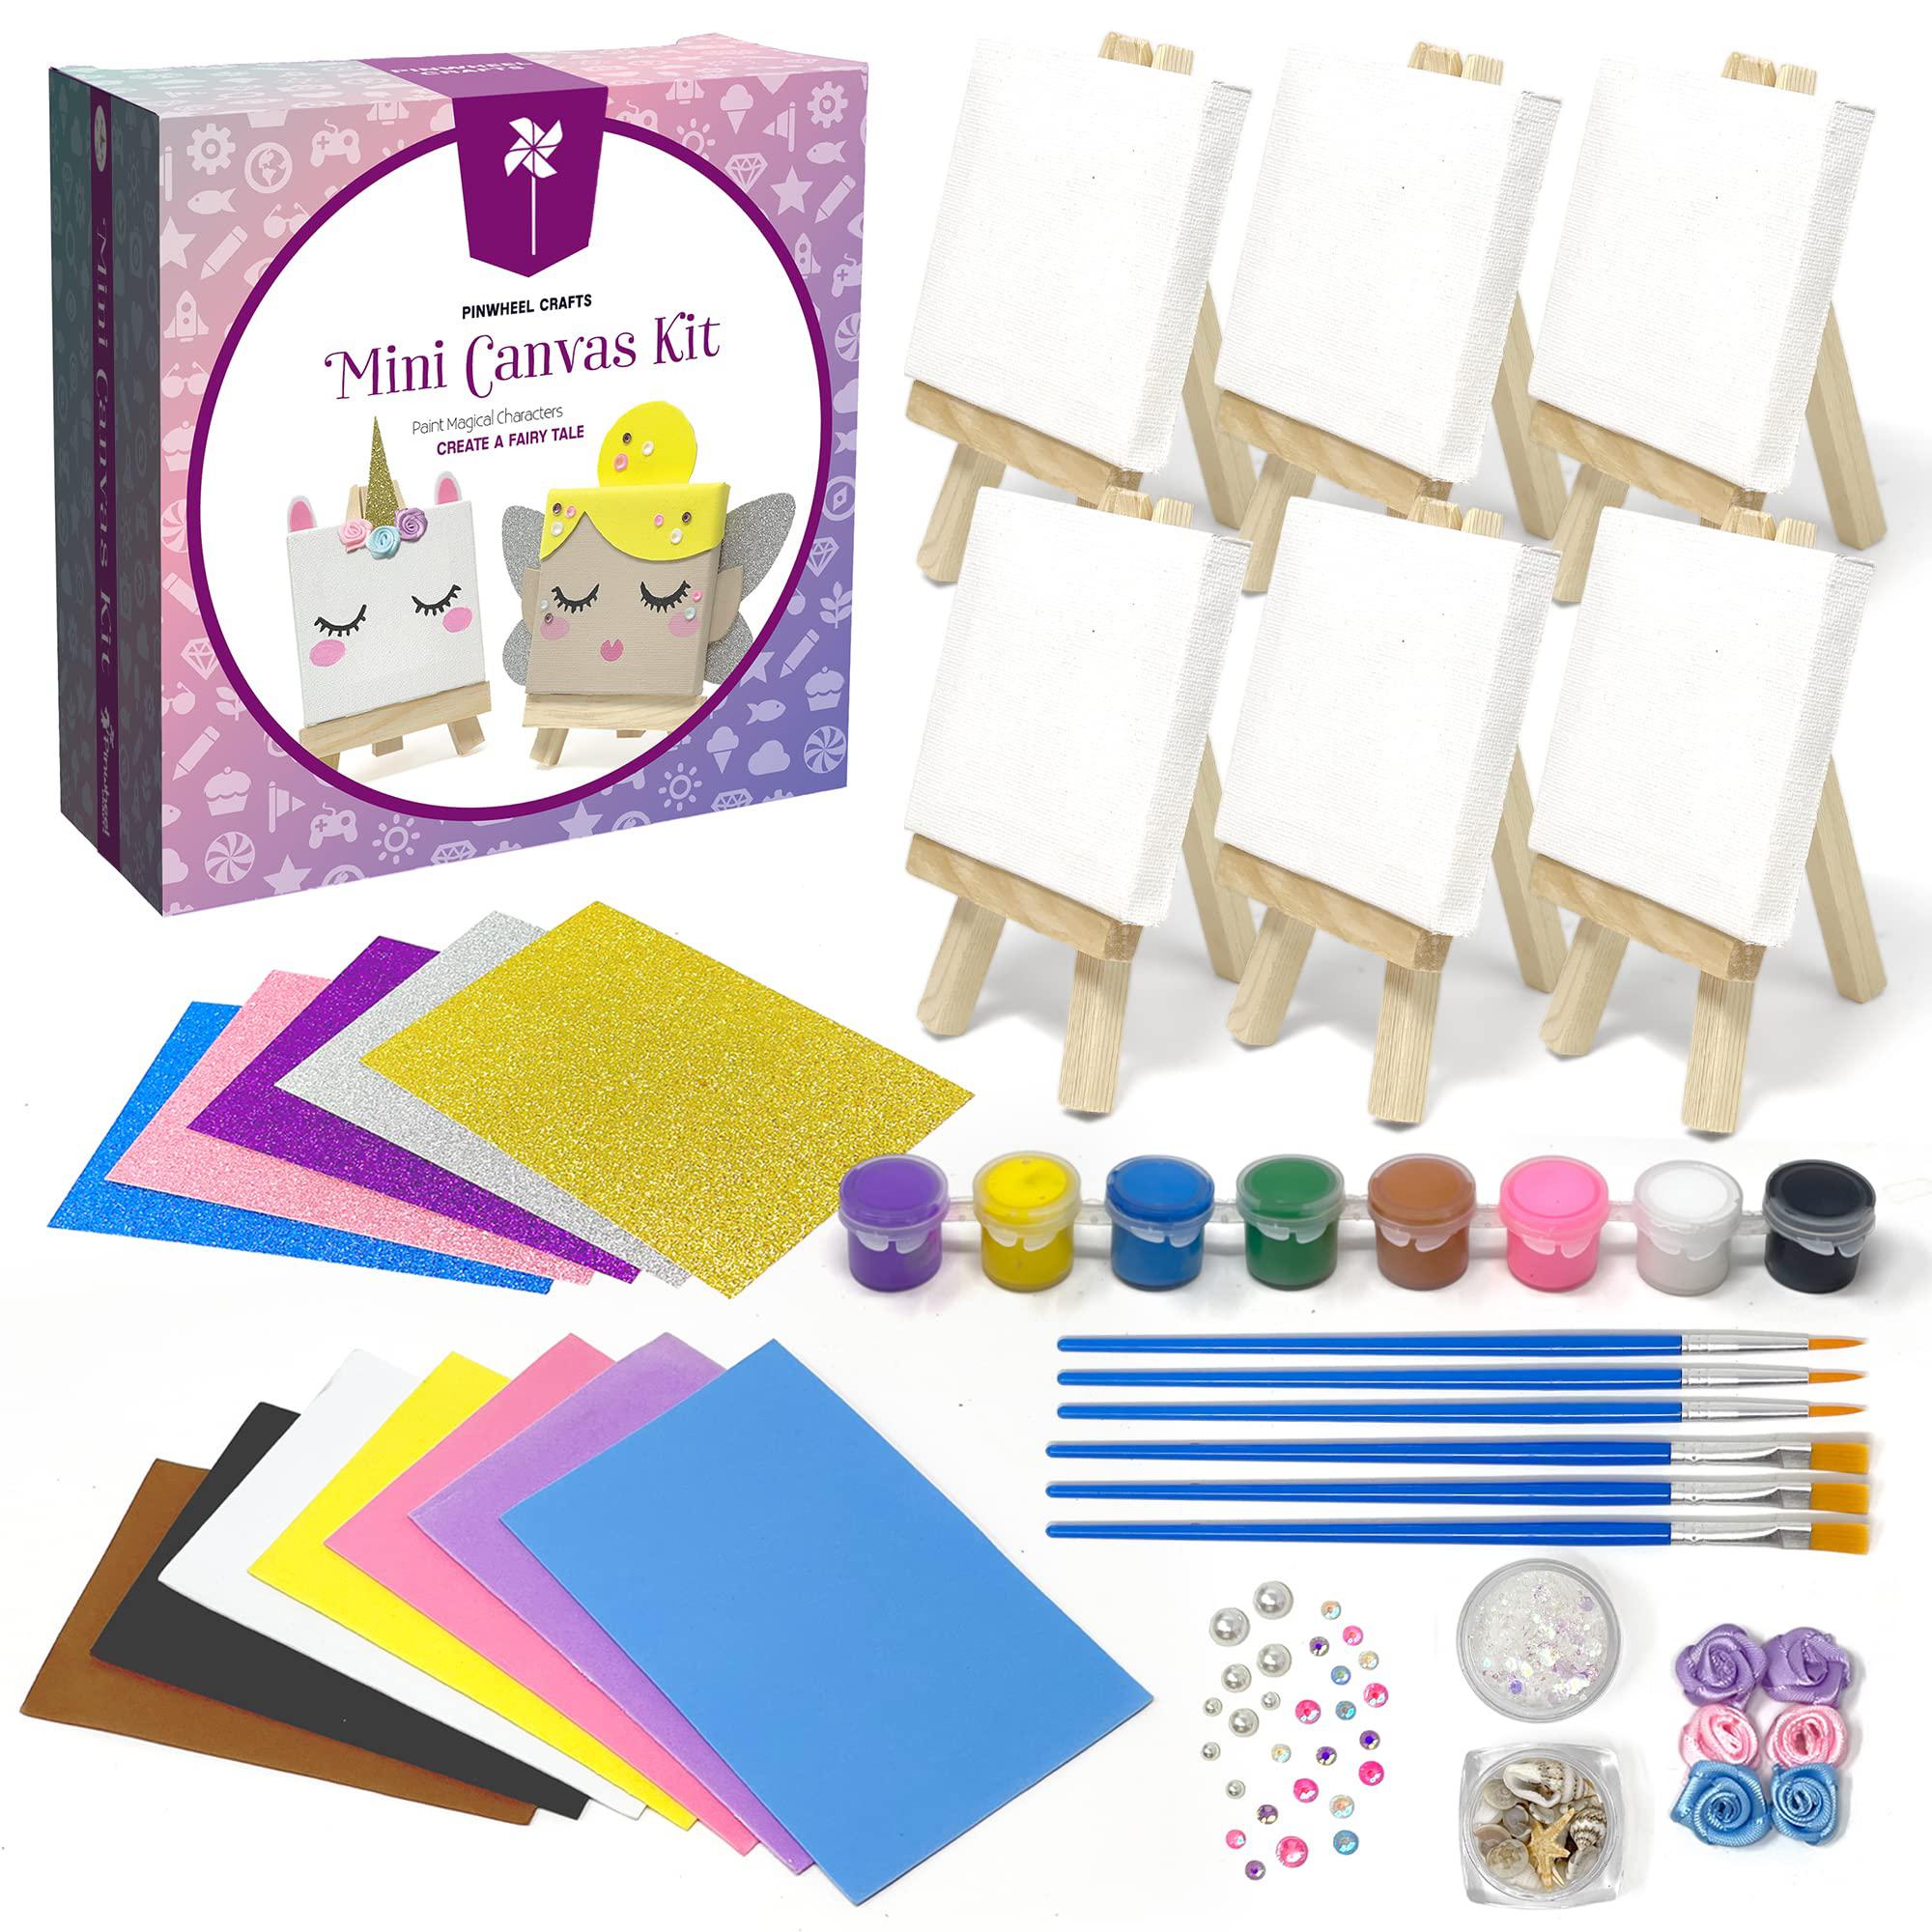 Pinwheel Crafts pinwheel crafts mini canvas & easel set, miniature painting  kit for kids, 6 small canvas panels value pack with paint brushes